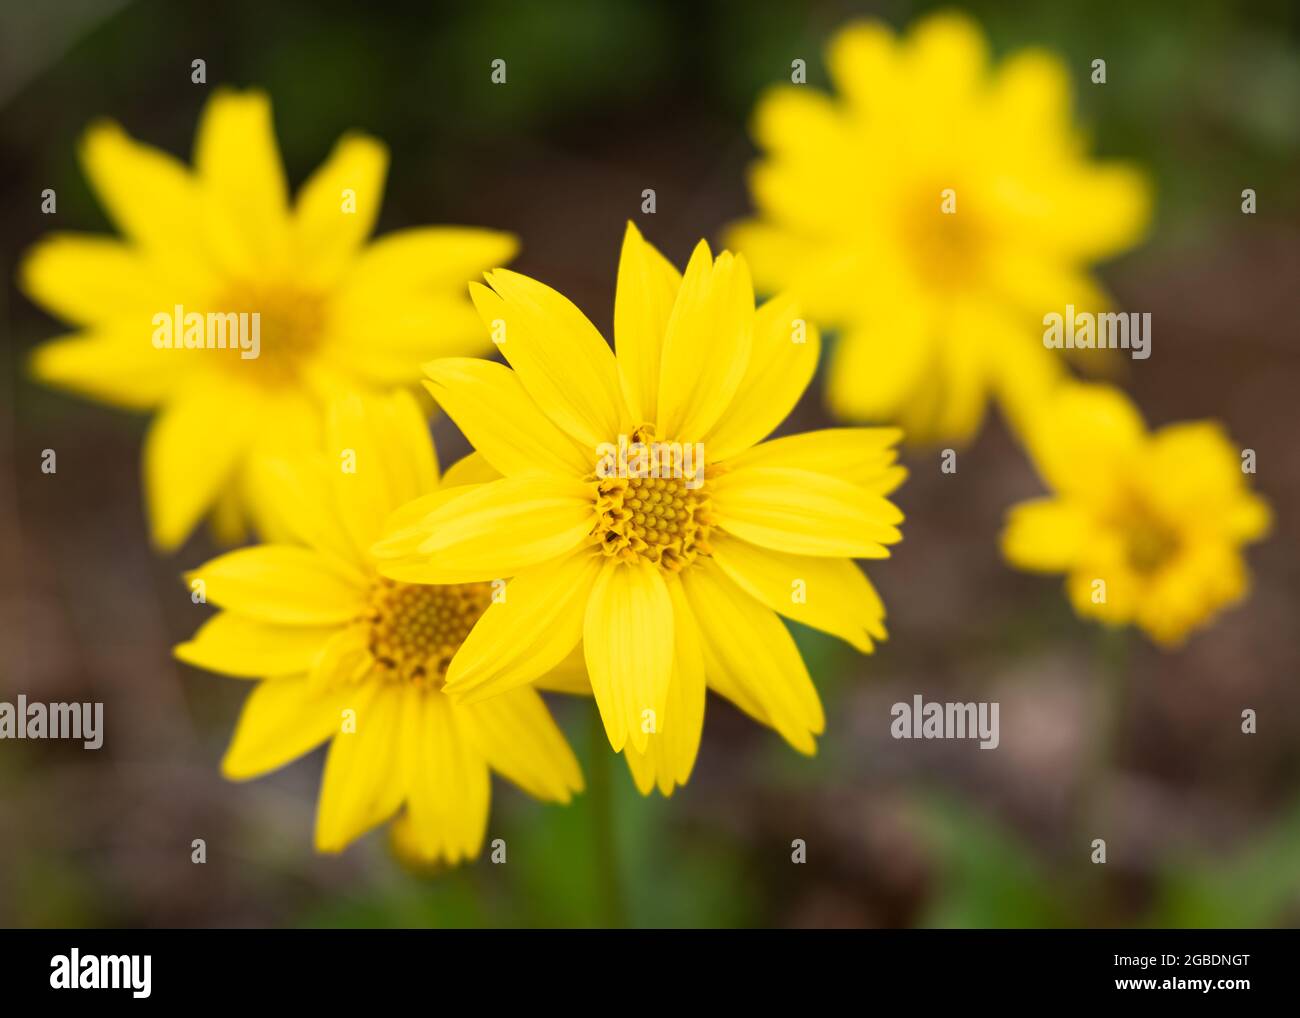 Yellow Daisy Bellis perennis in Bloom Stock Photo